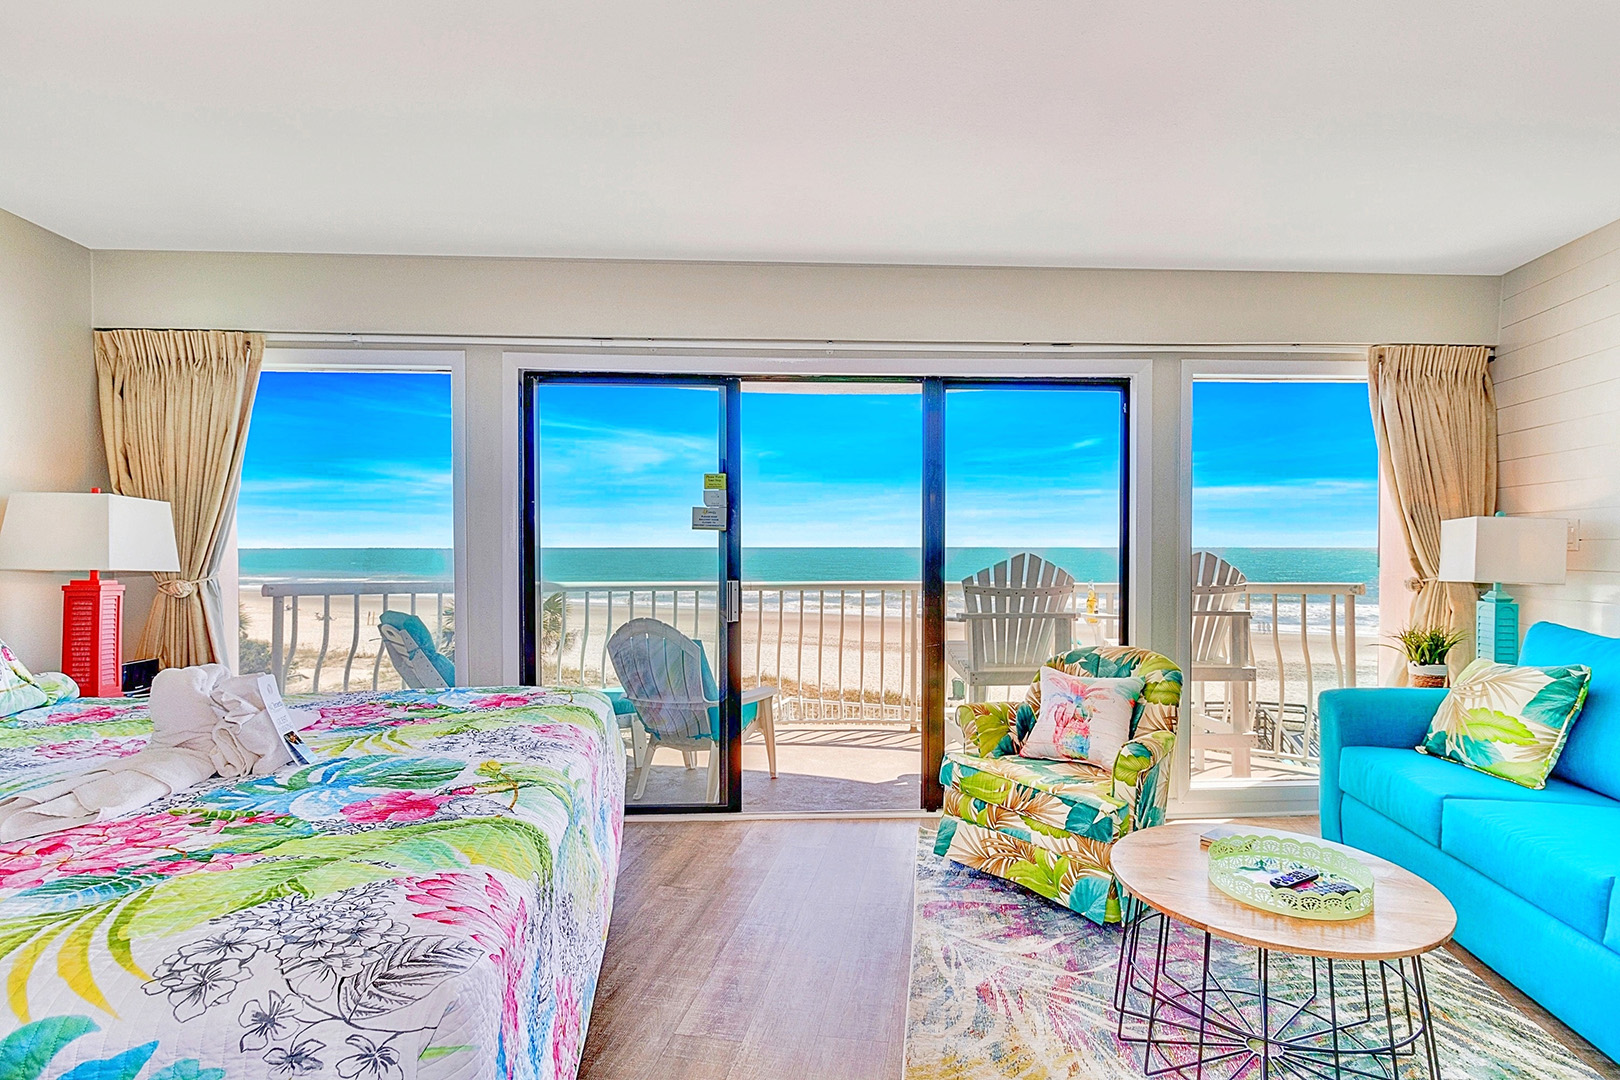 Ocean view from the windows and doors of the bedroom